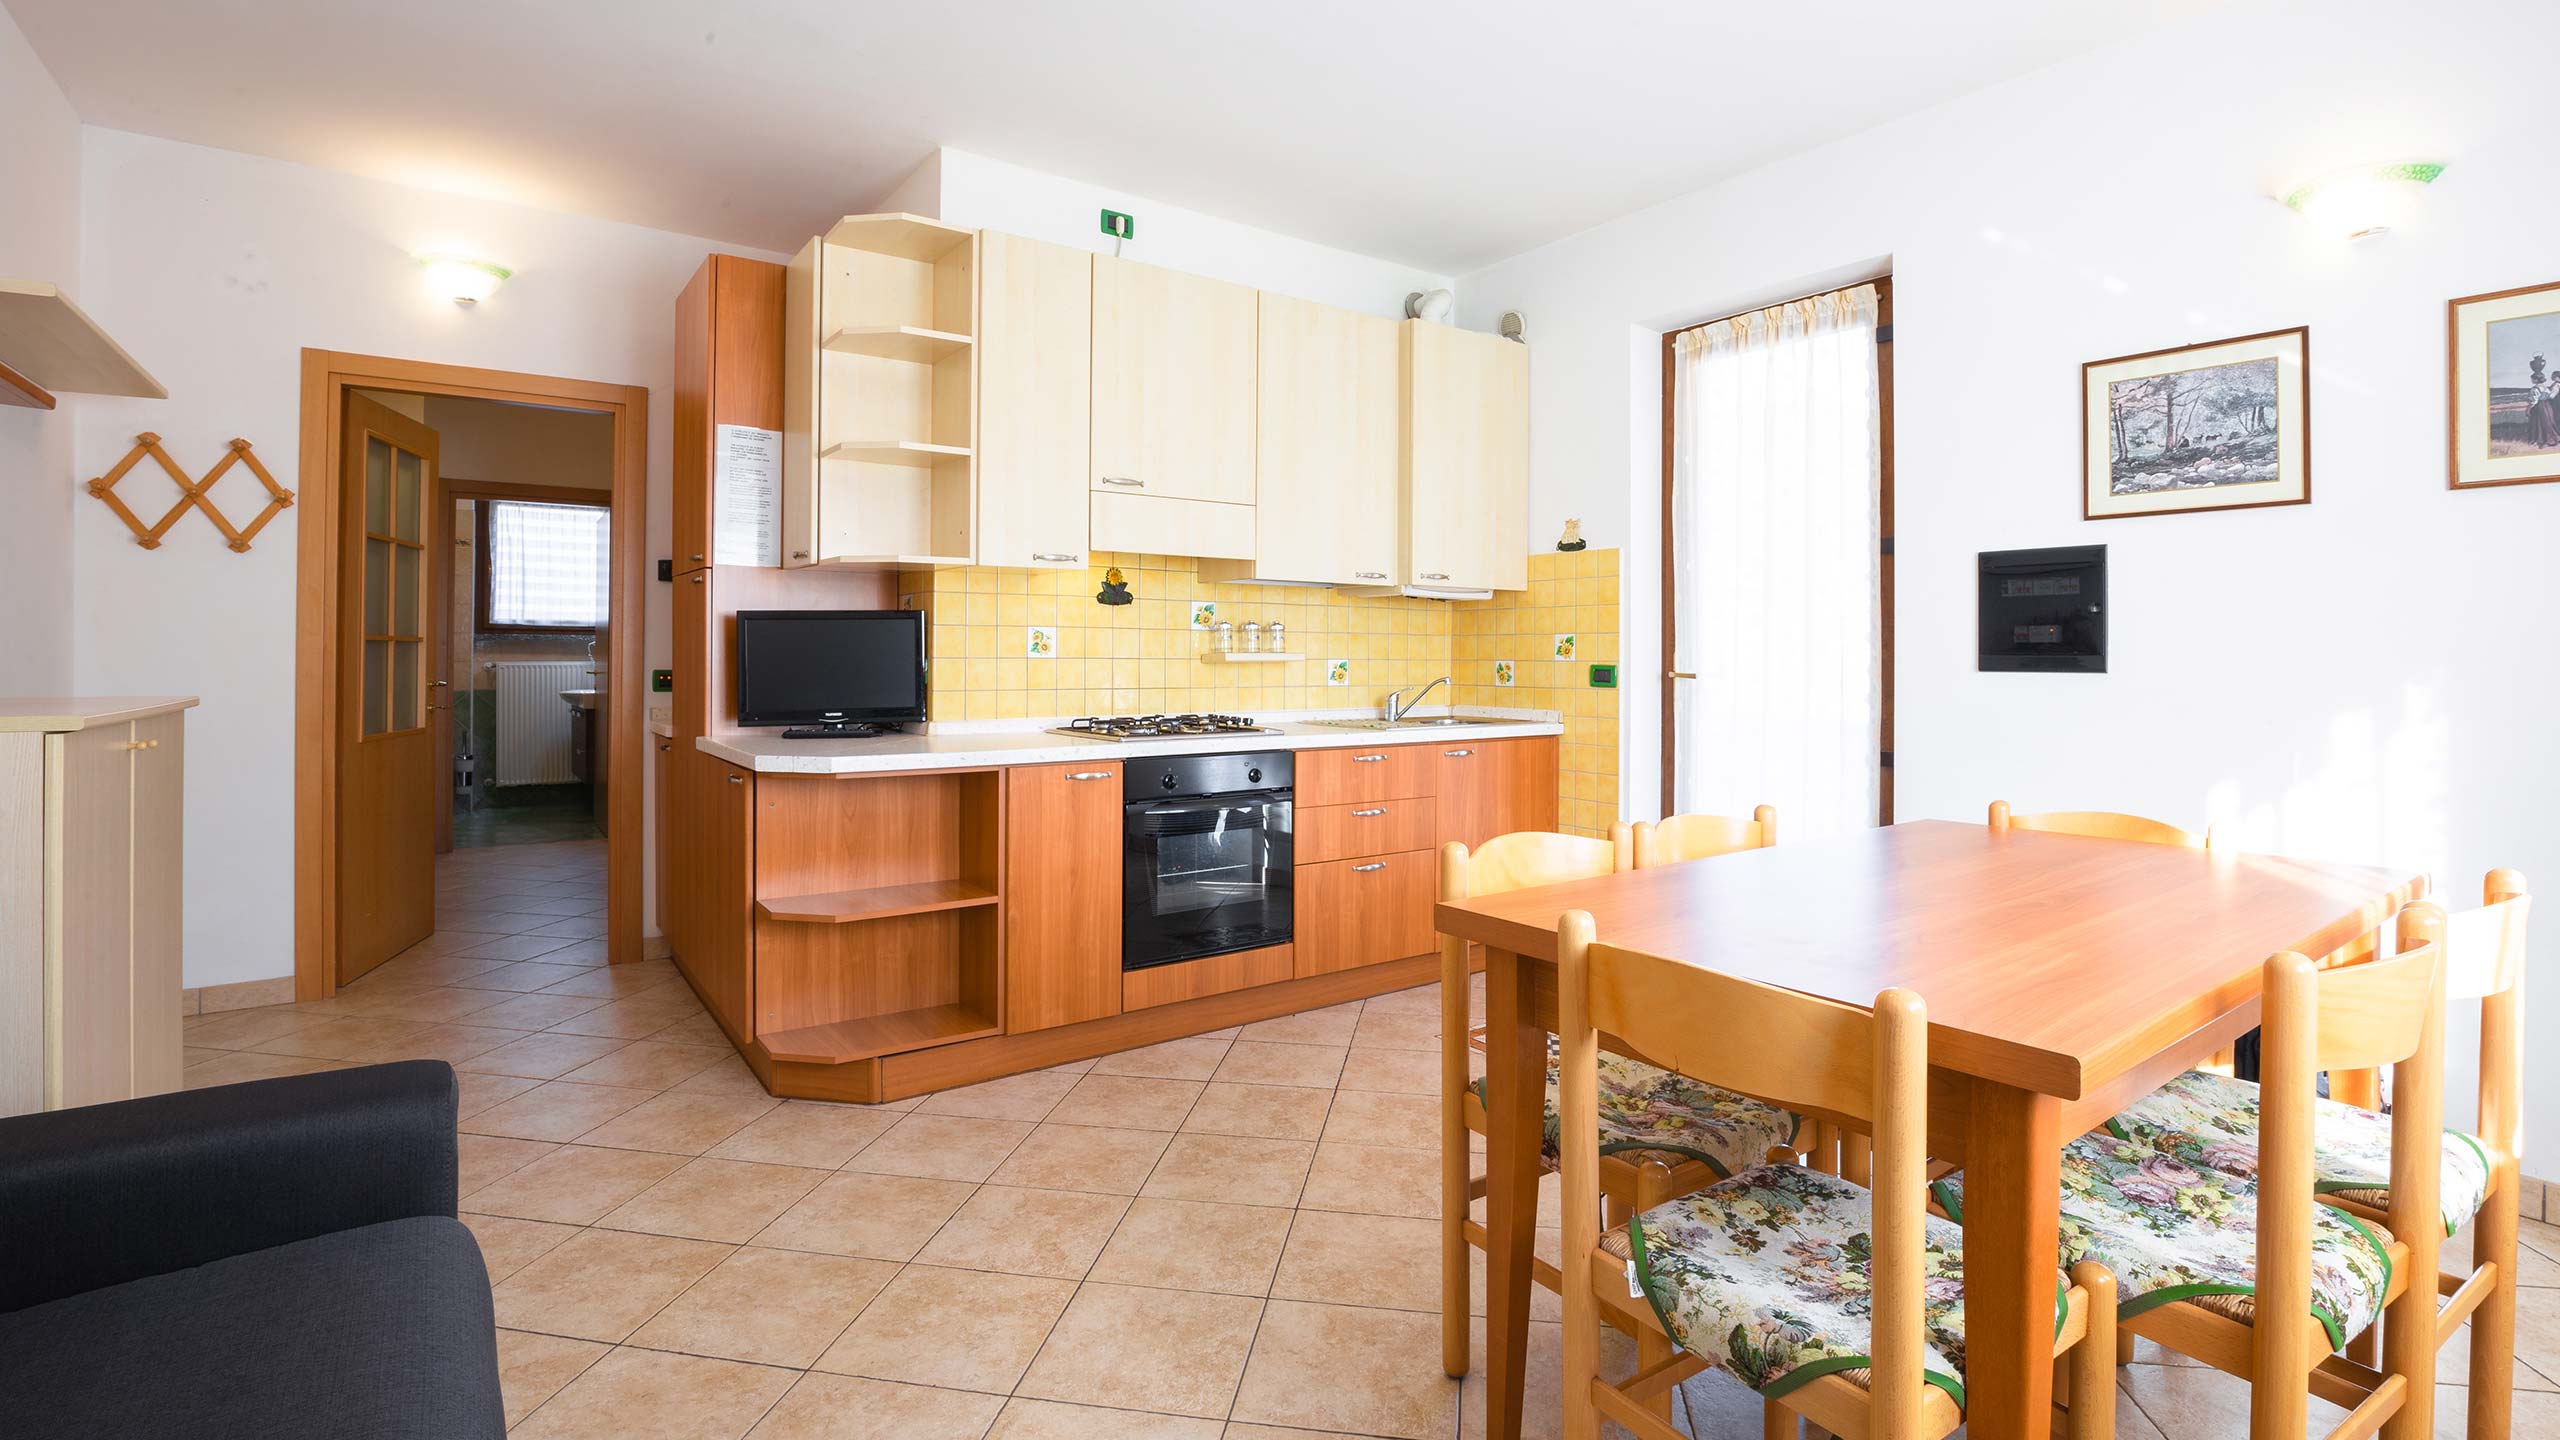 Crosina Holiday - apartment near Lake Ledro in Trentino for a family or family holiday Welcome to Casa Lucia